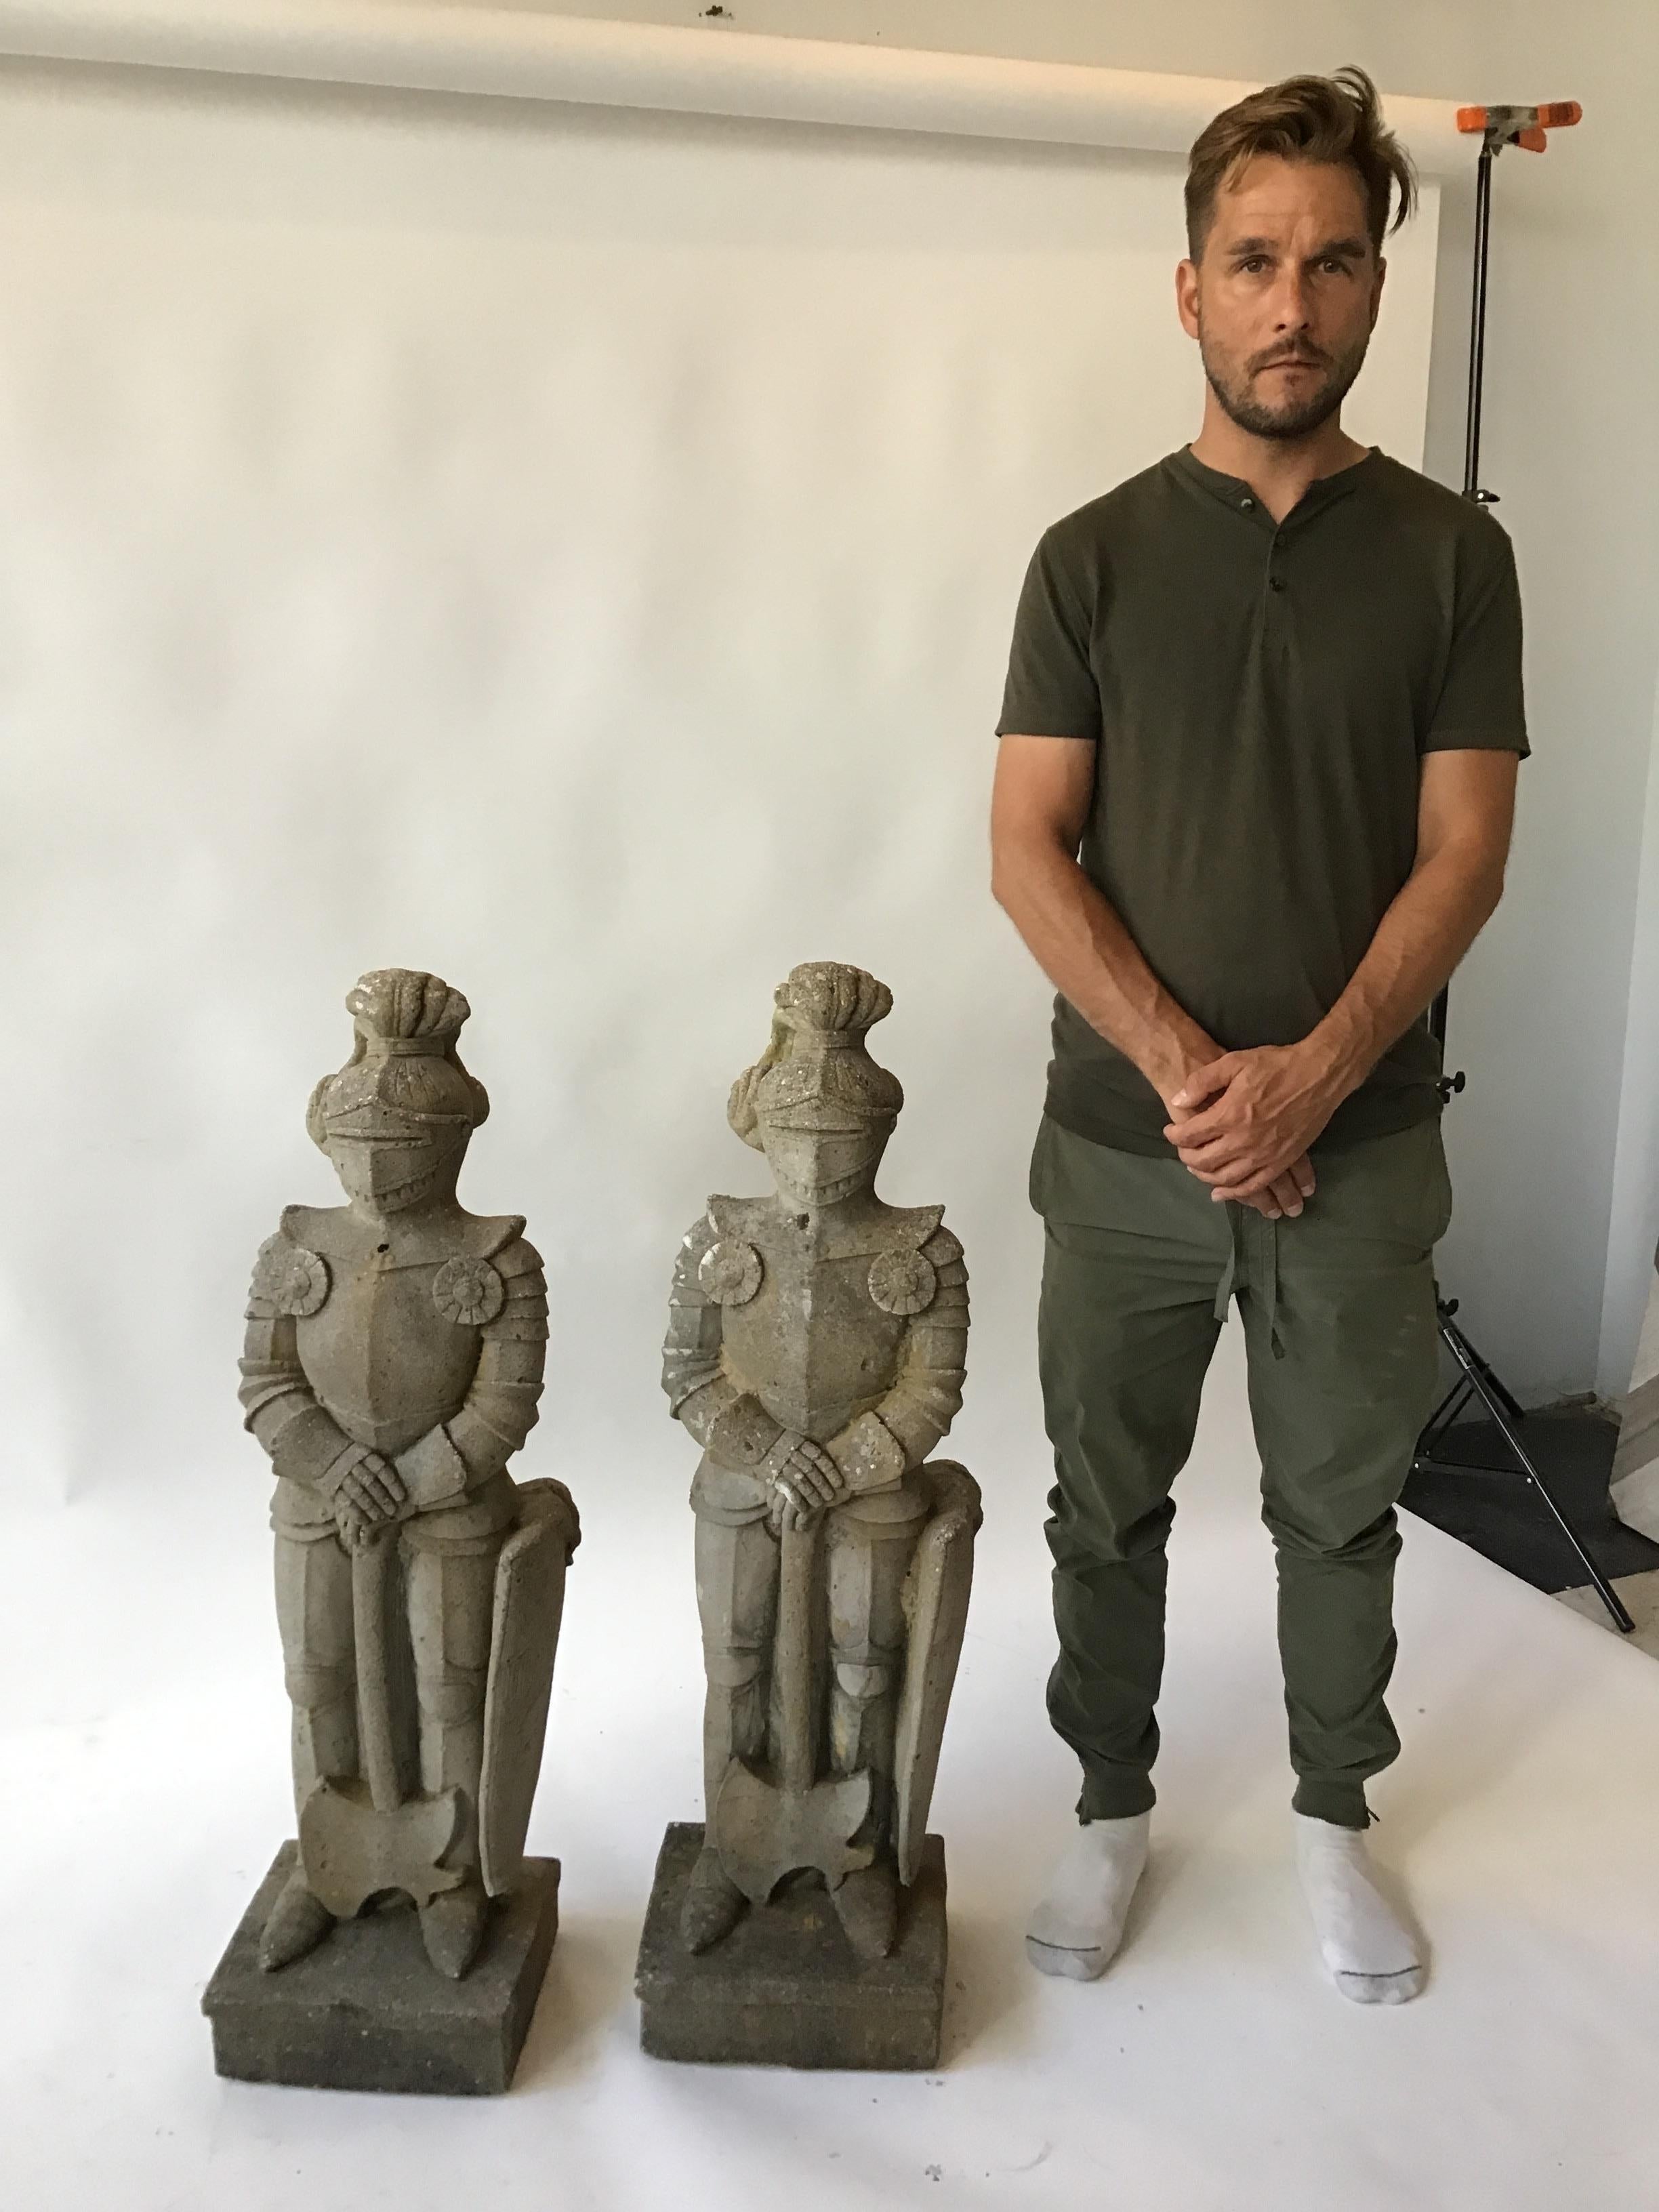 Pair of 1950s concrete knights. Rare, I’ve never seen concrete knights before. Out of an East Hampton, NY estate.